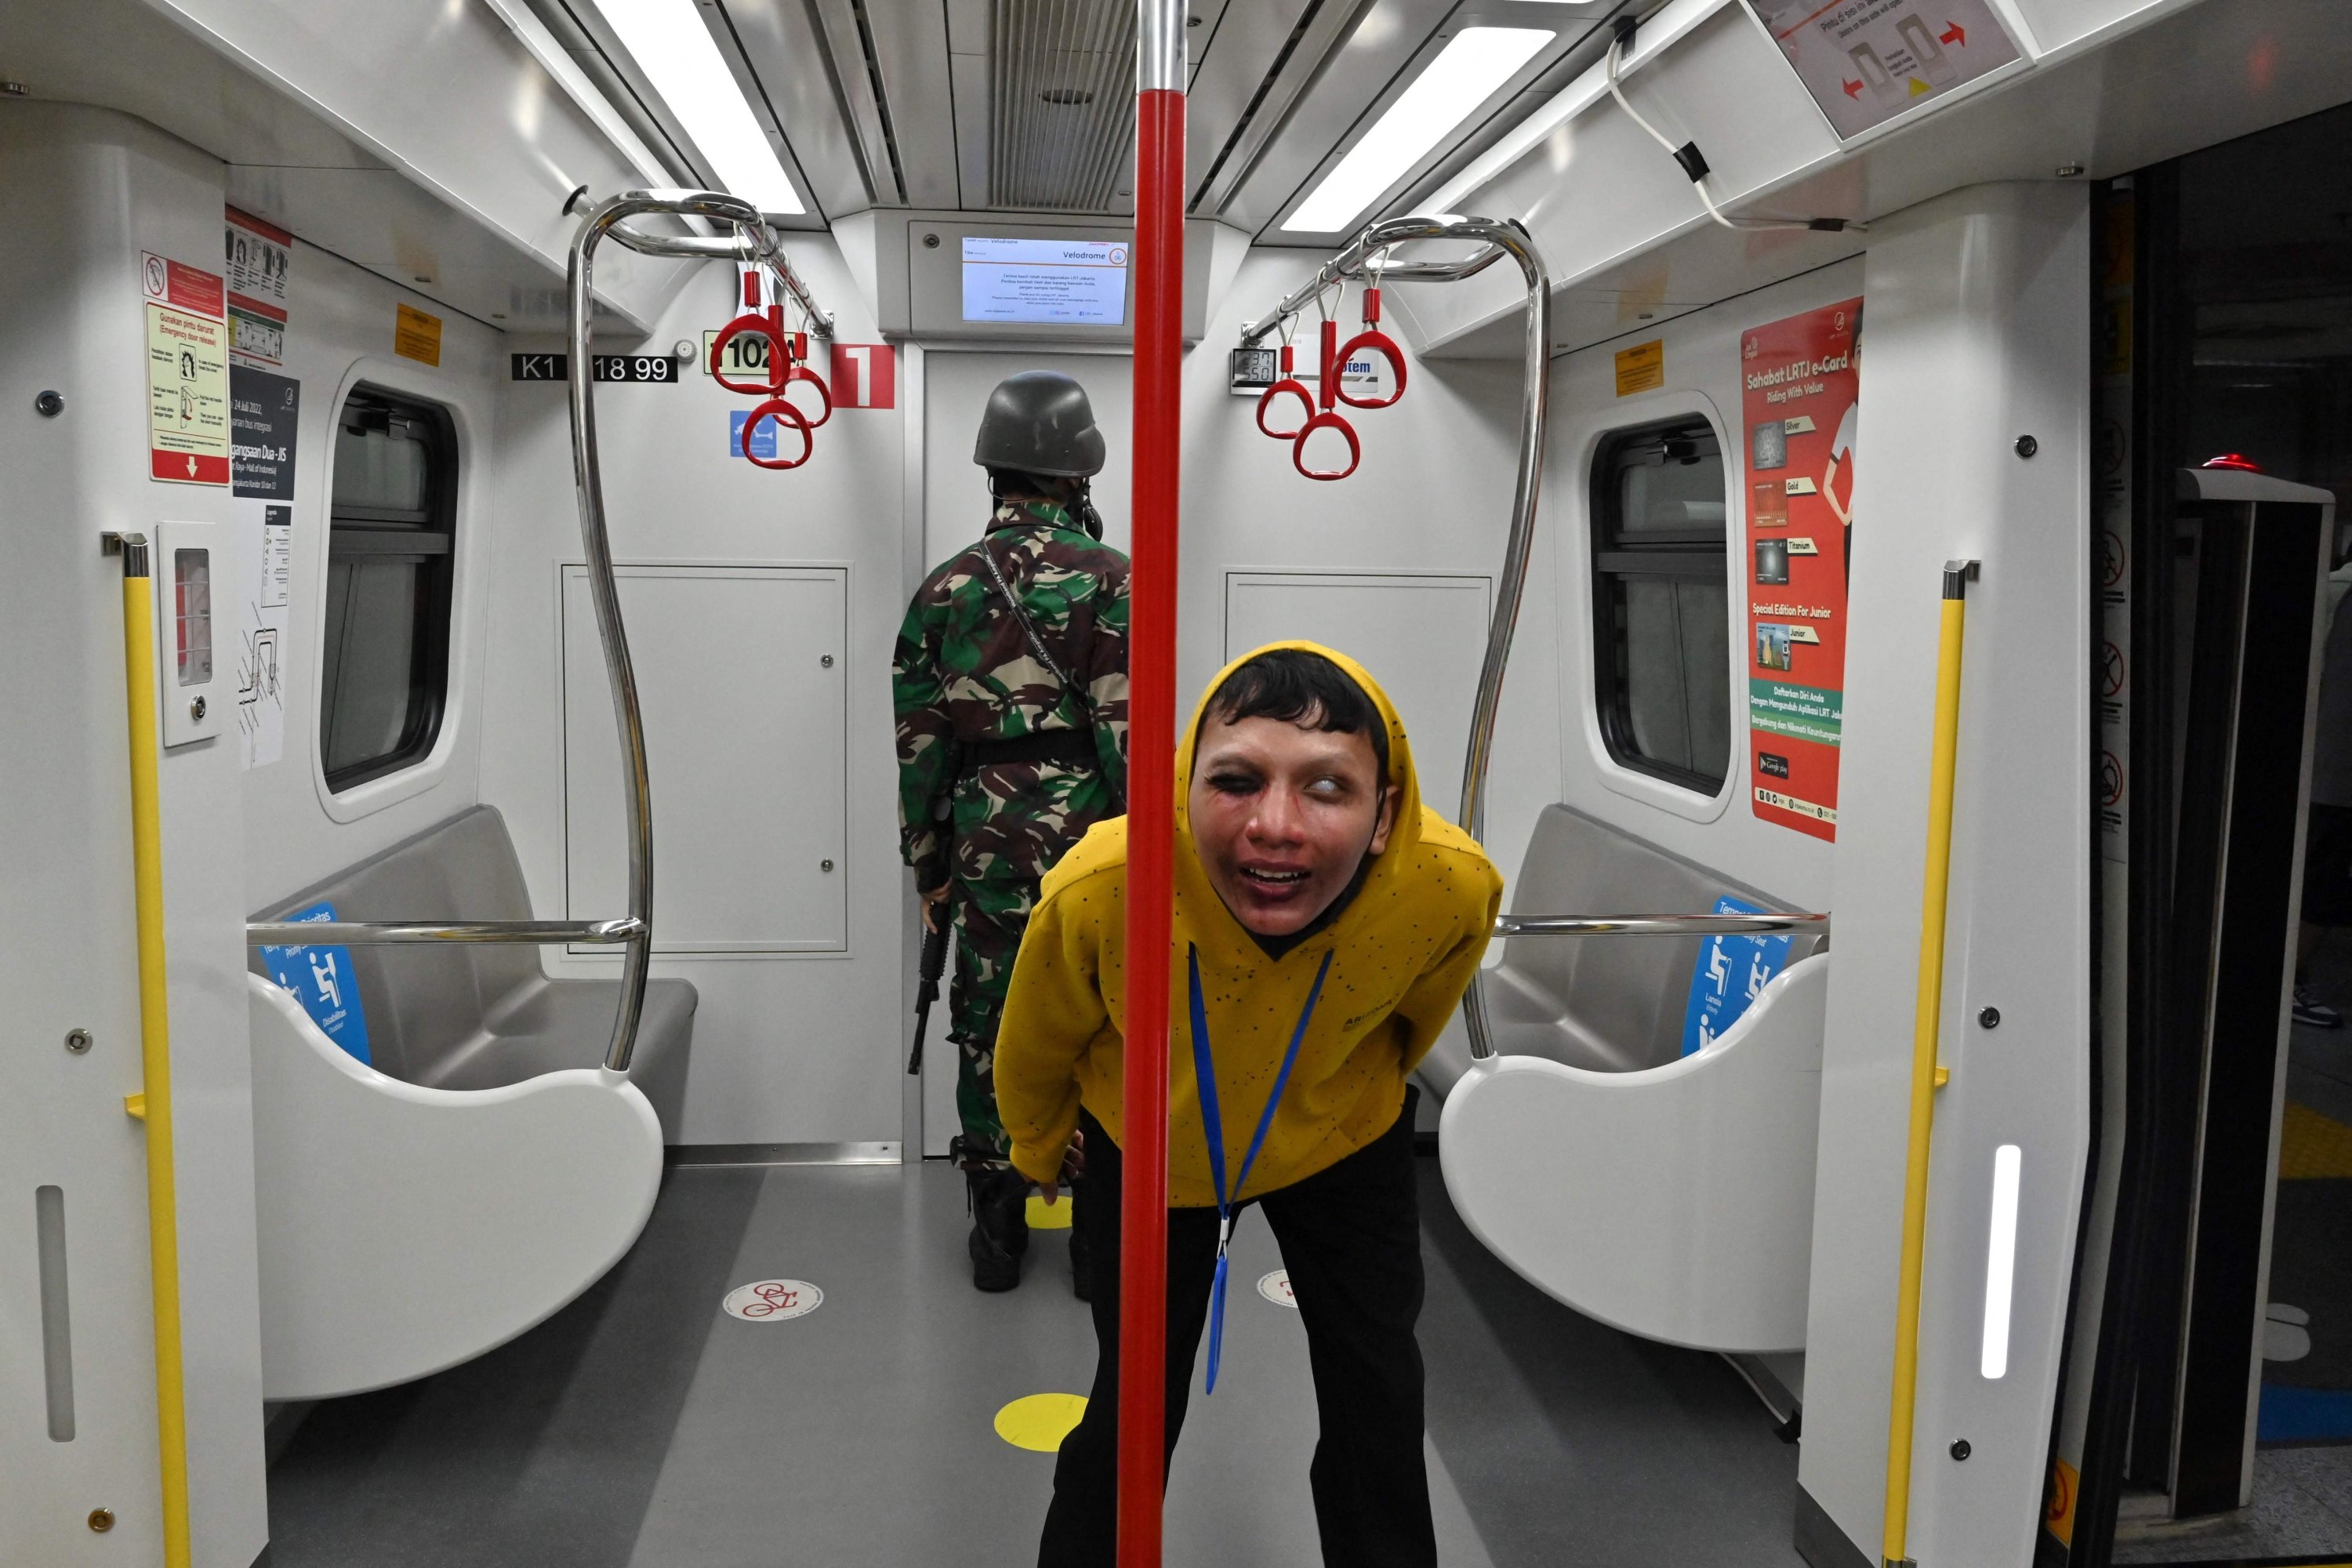 This picture shows performers acting out as zombies attacking a soldier on board an LRT coach as part of the 